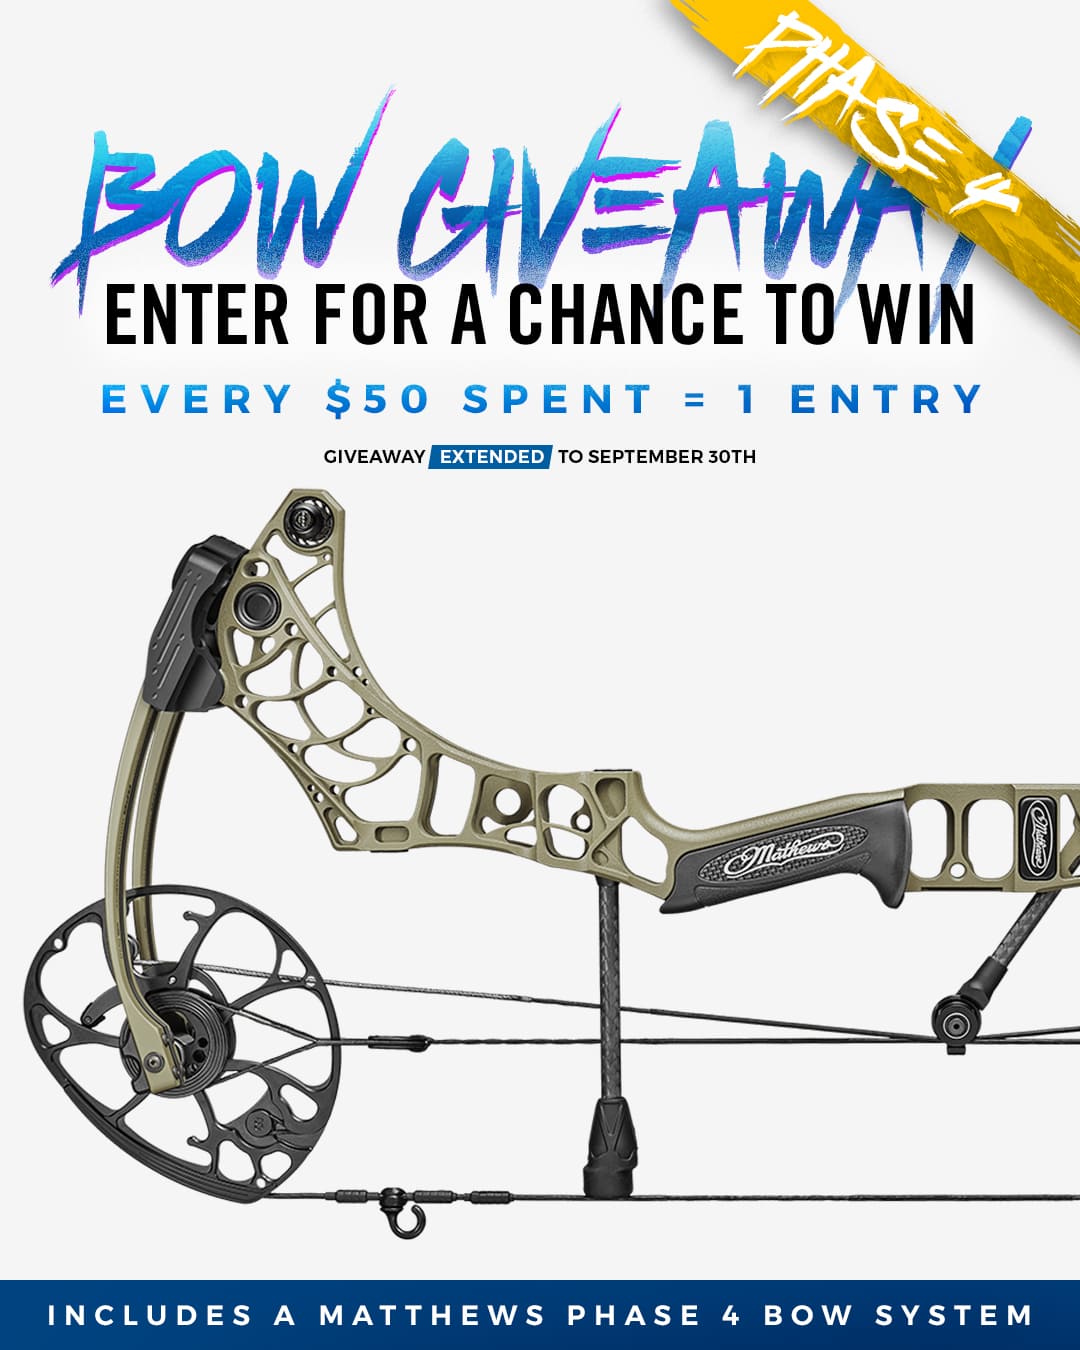 Muley Freak Matthews Phase 4 Bow System Giveaway